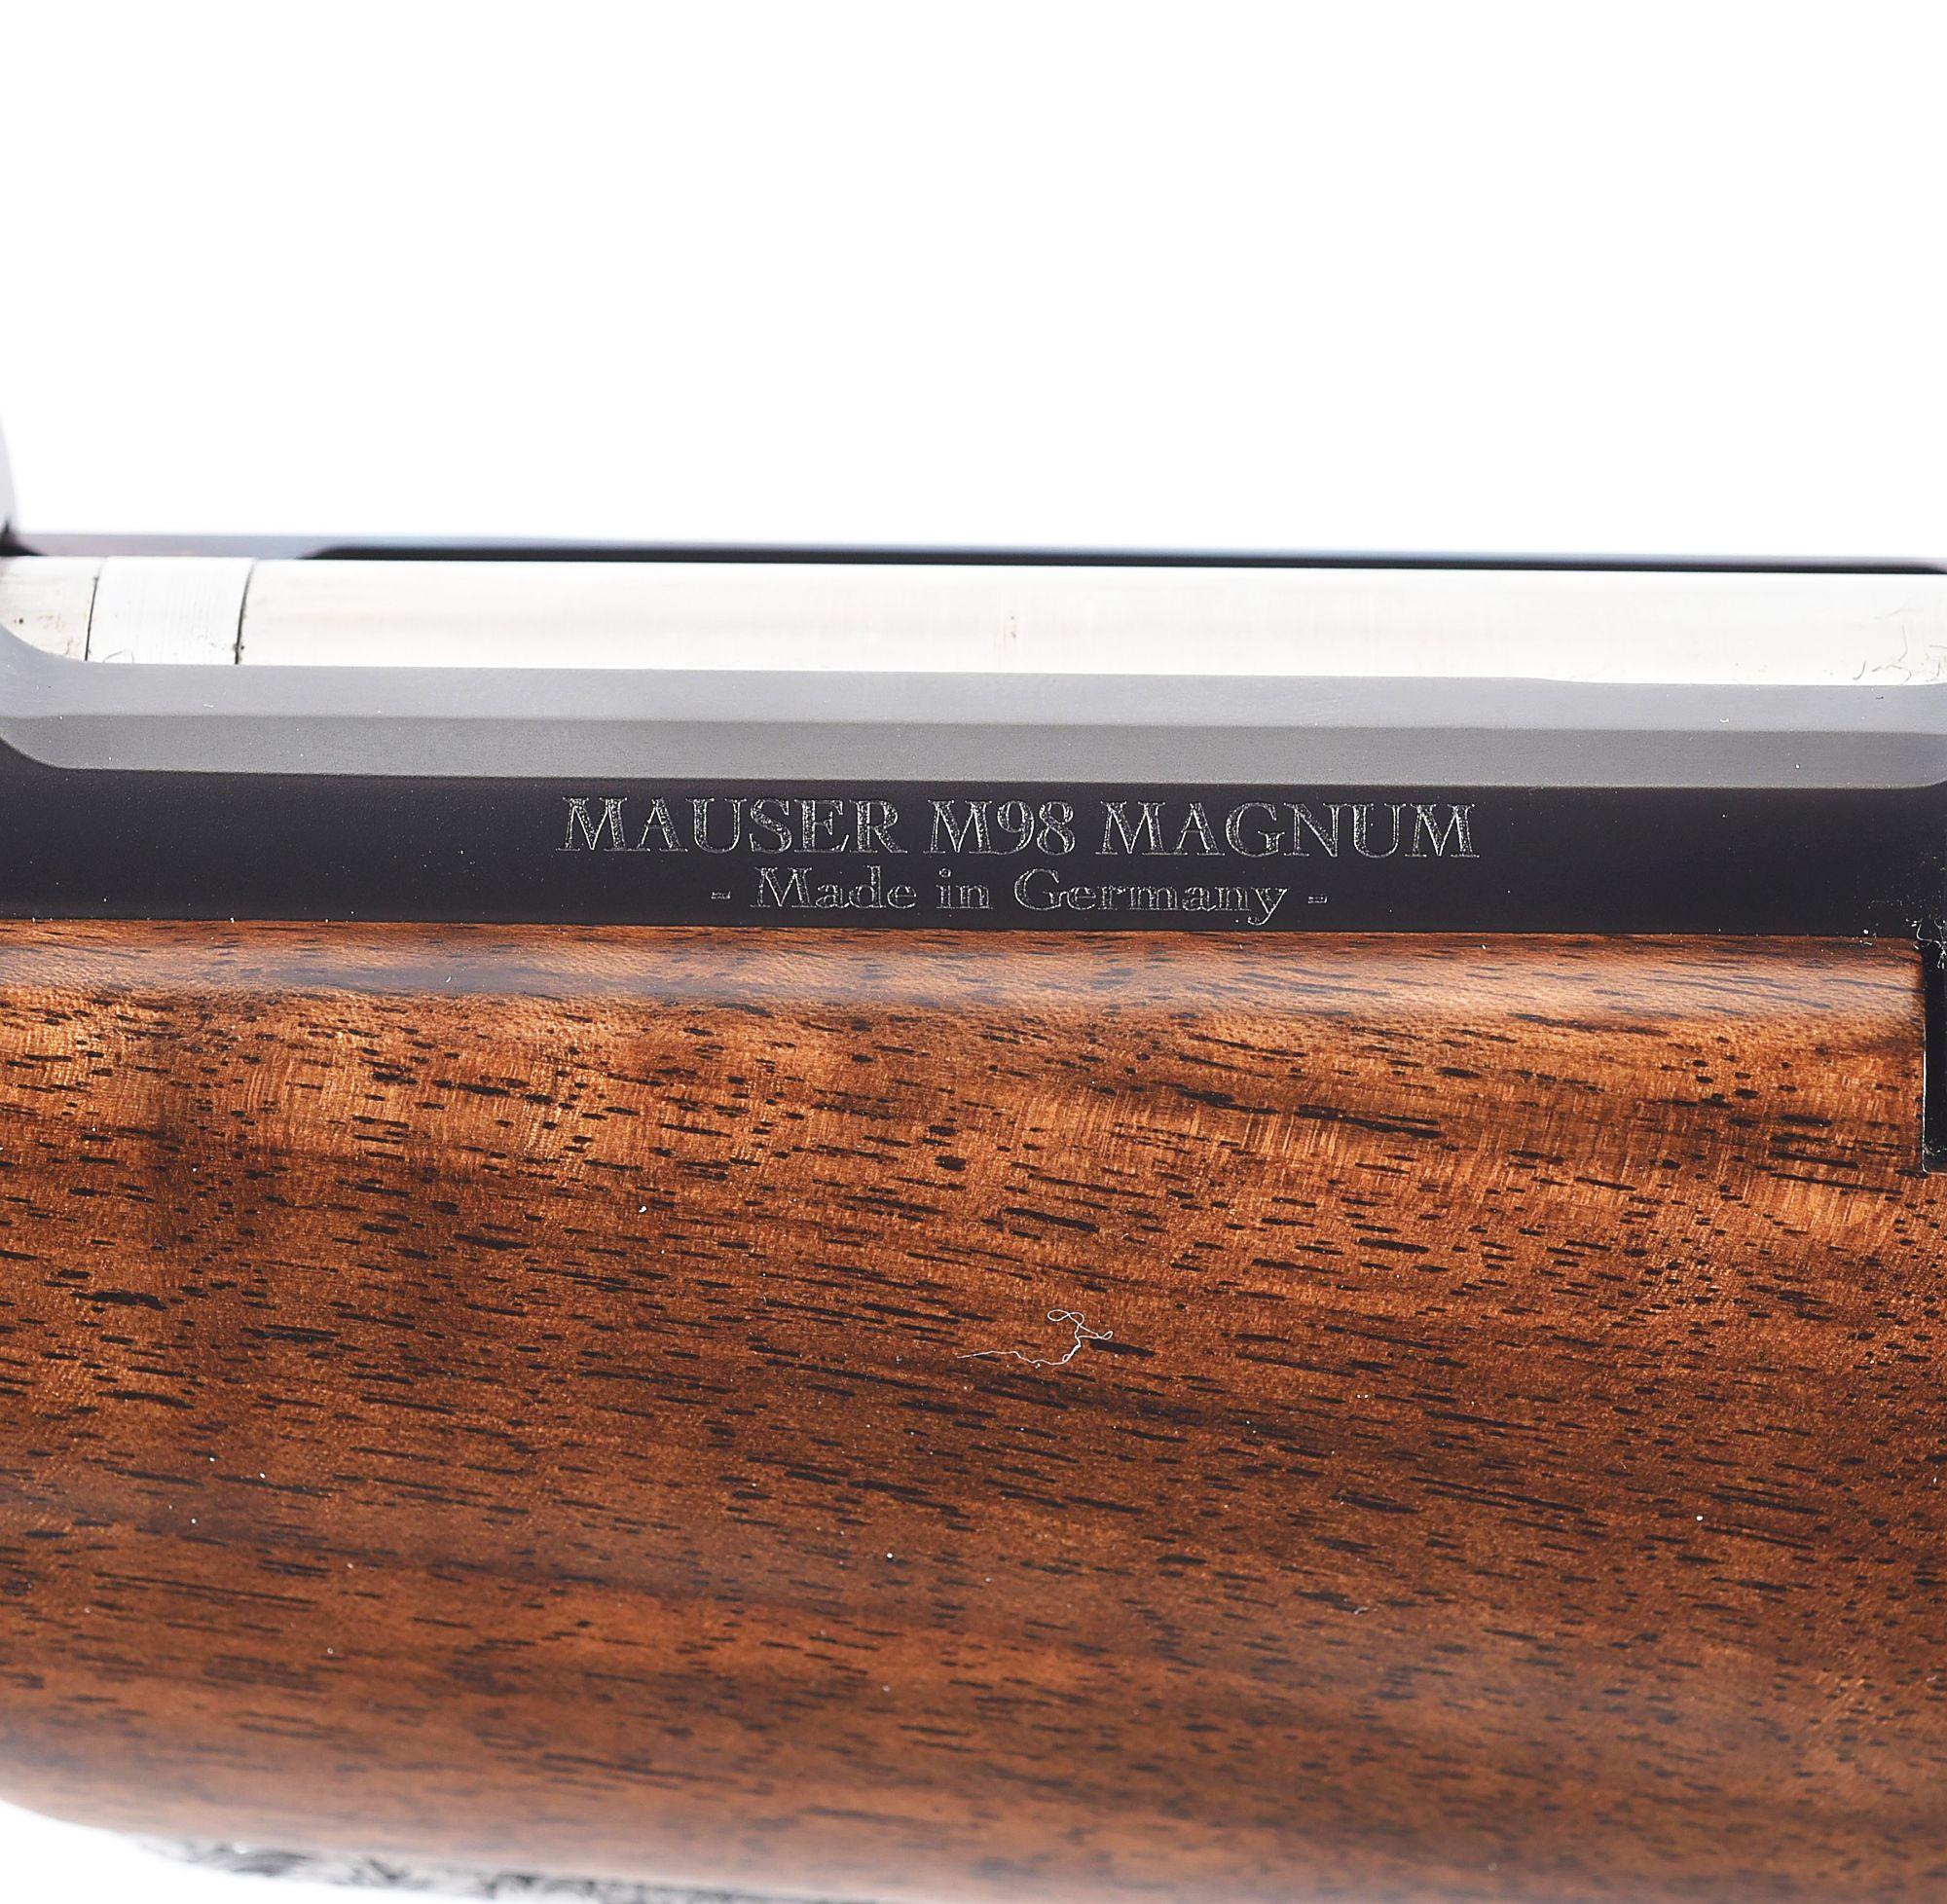 (M) RIGBY BIG GAME BOLT ACTION IN .416 RIGBY WITH SWAROVSKI GLASS.